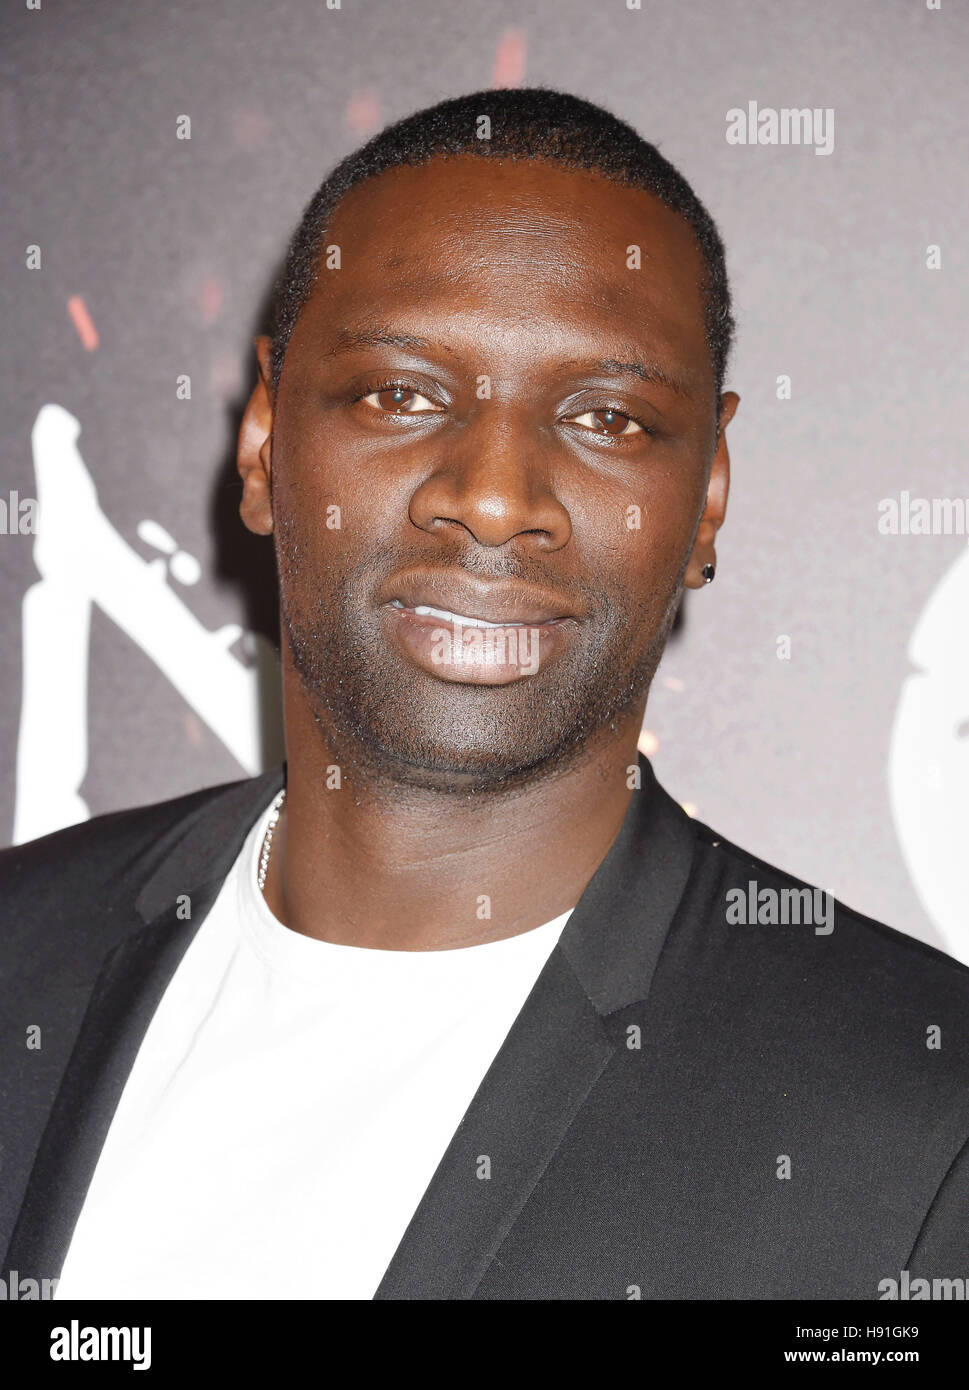 Omar Sy French Film Actor Stock Photos & Omar Sy French Film Actor ...